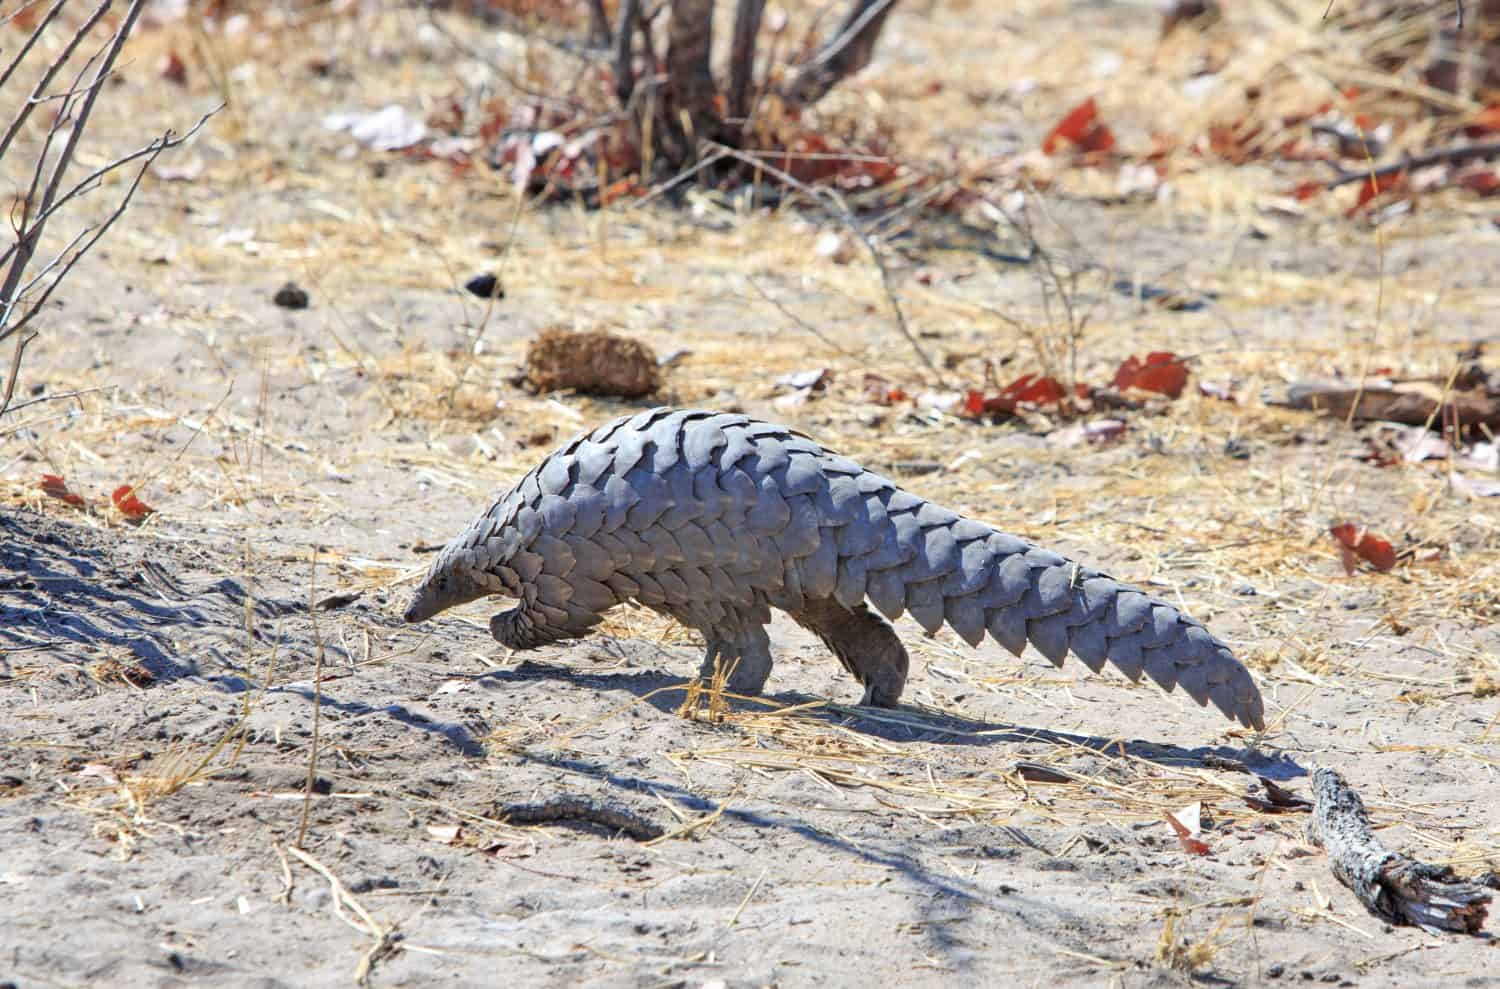 Rare sighting of a wild African pangolin walking through the bush.  They are UNESCO threatened Red list and are critically endangered due to poaching.  The scales are a delicacy in China